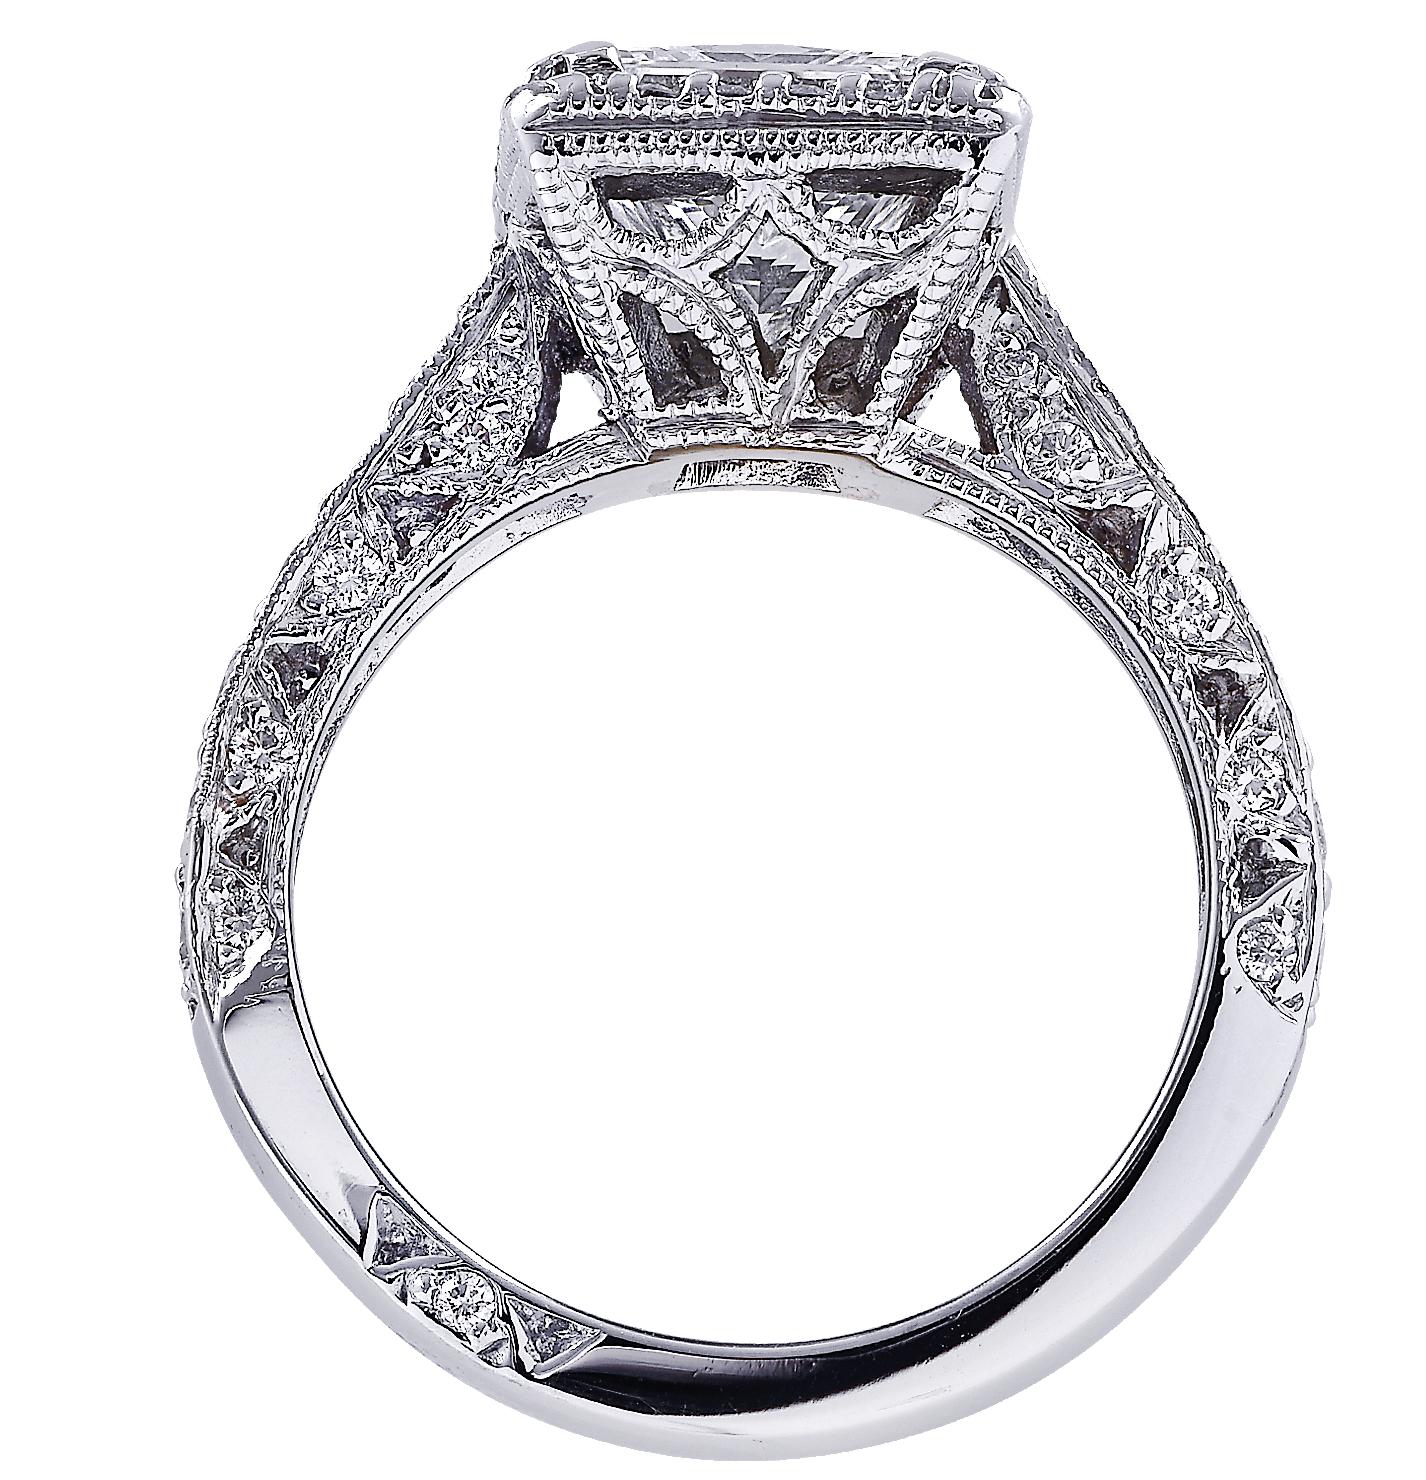 Sensational Vivid Diamonds halo engagement ring crafted in platinum showcasing an exquisite GIA Certified Princess Cut diamond weighing 2.04 carats, H color, VS1 clarity (GIA report # 15199124). The halo and band of this spectacular ring are adorned